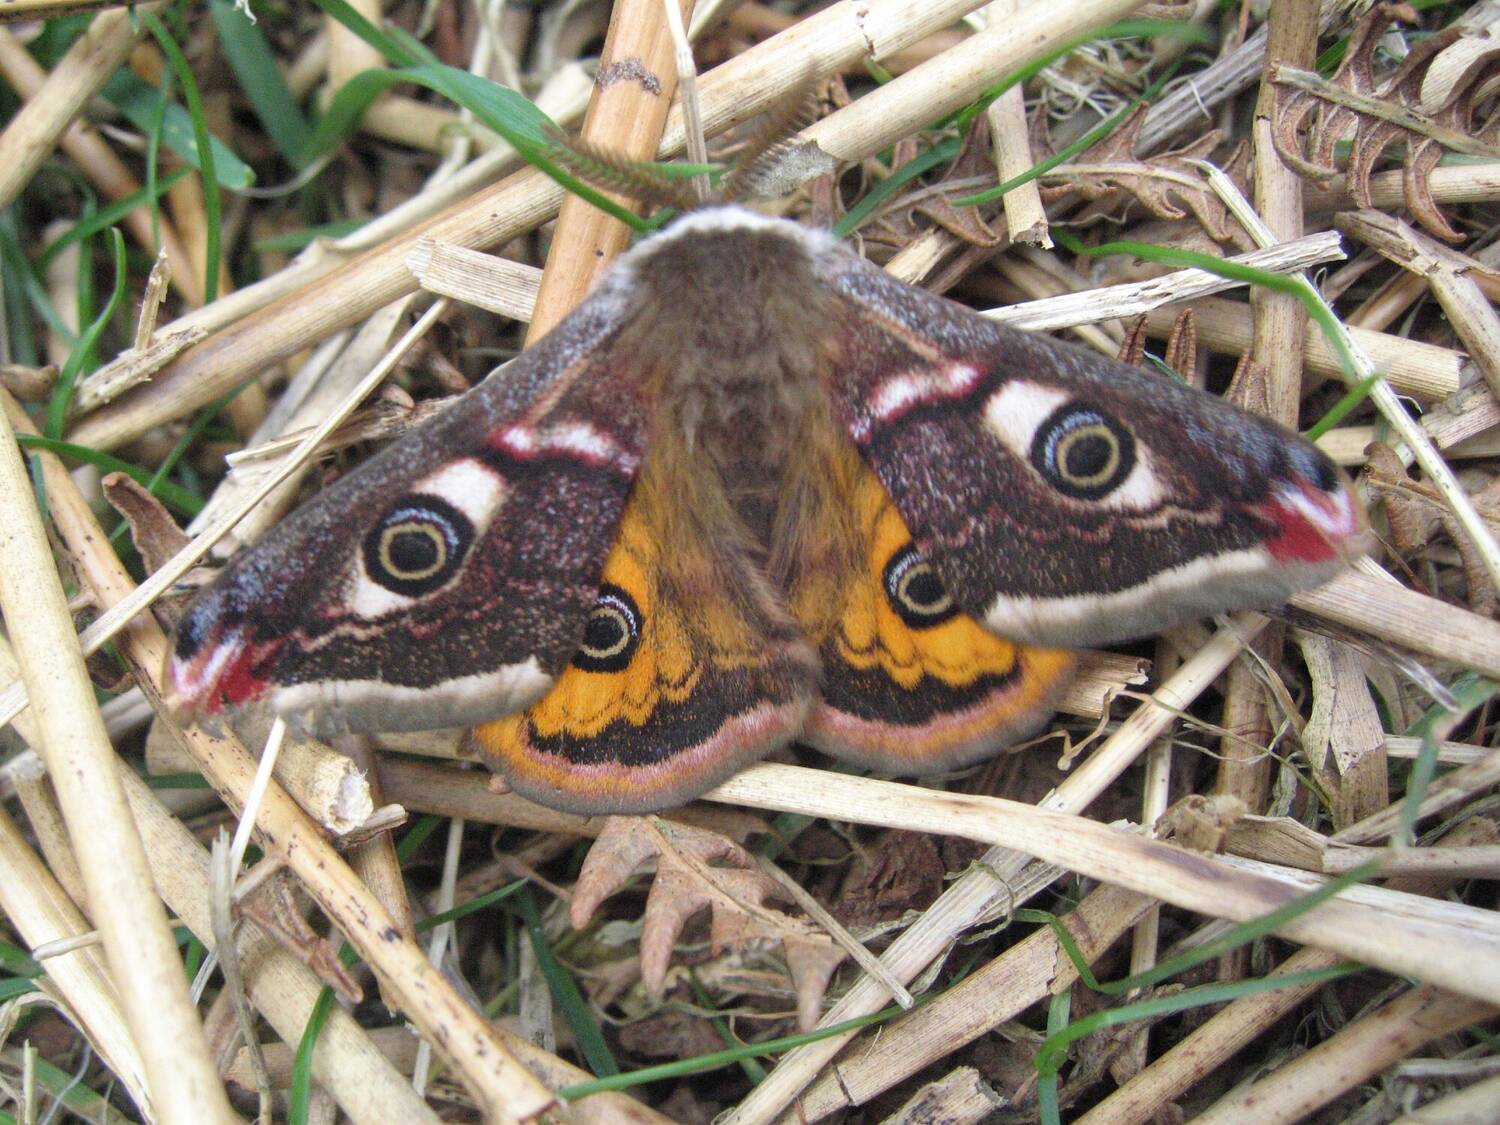 Male emperor moth on straw. It has prominent eyespots on its forewings and hindwings.